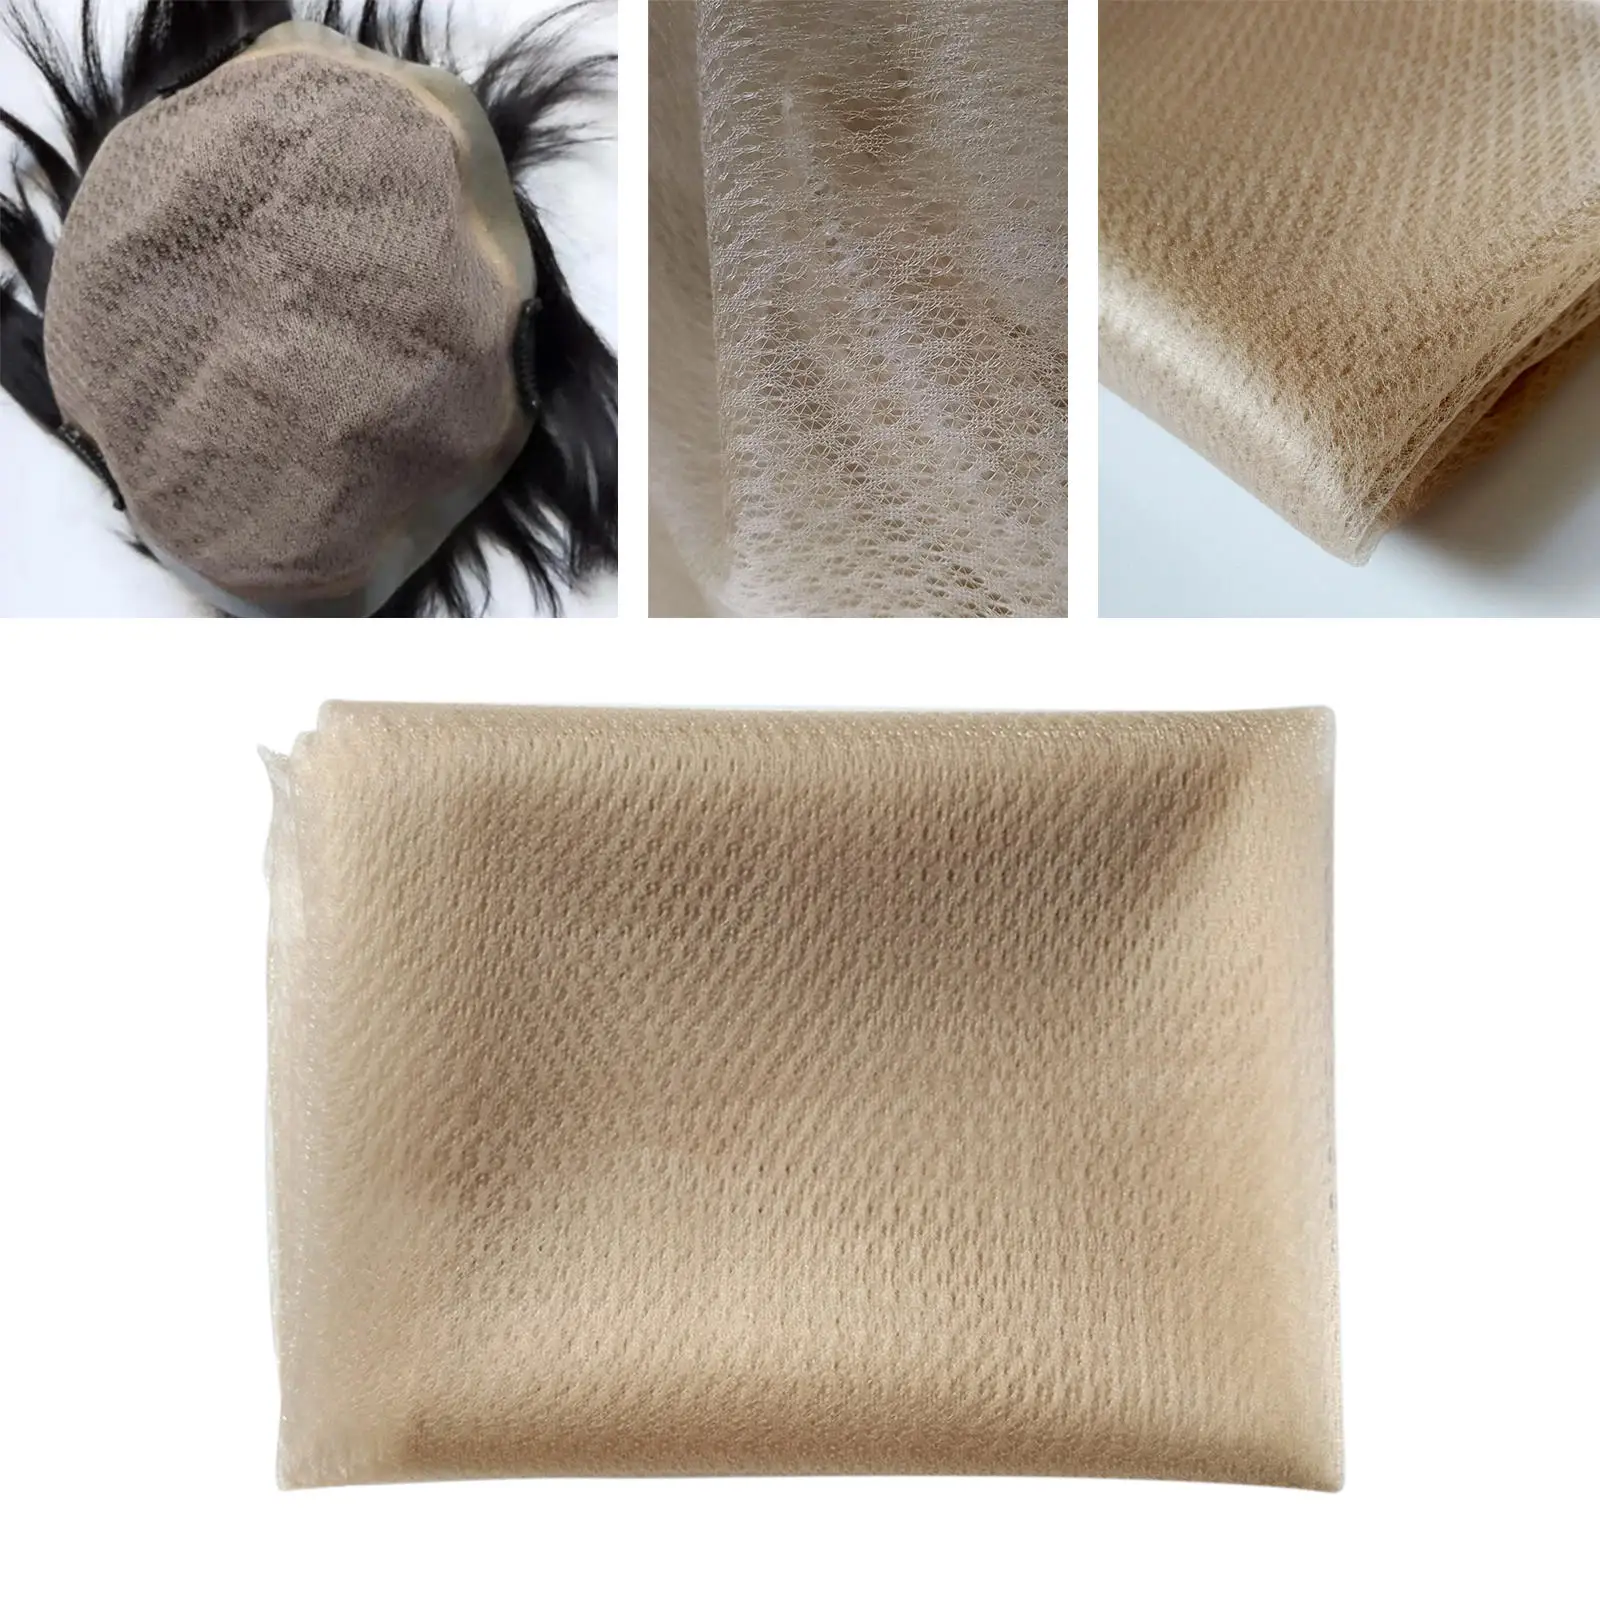 Lace Net 1 Yard Hairnet Mesh Material Wig Caps for Frontals Closures Making Wig Foundation Closure Caps Toupee Wig Accessories